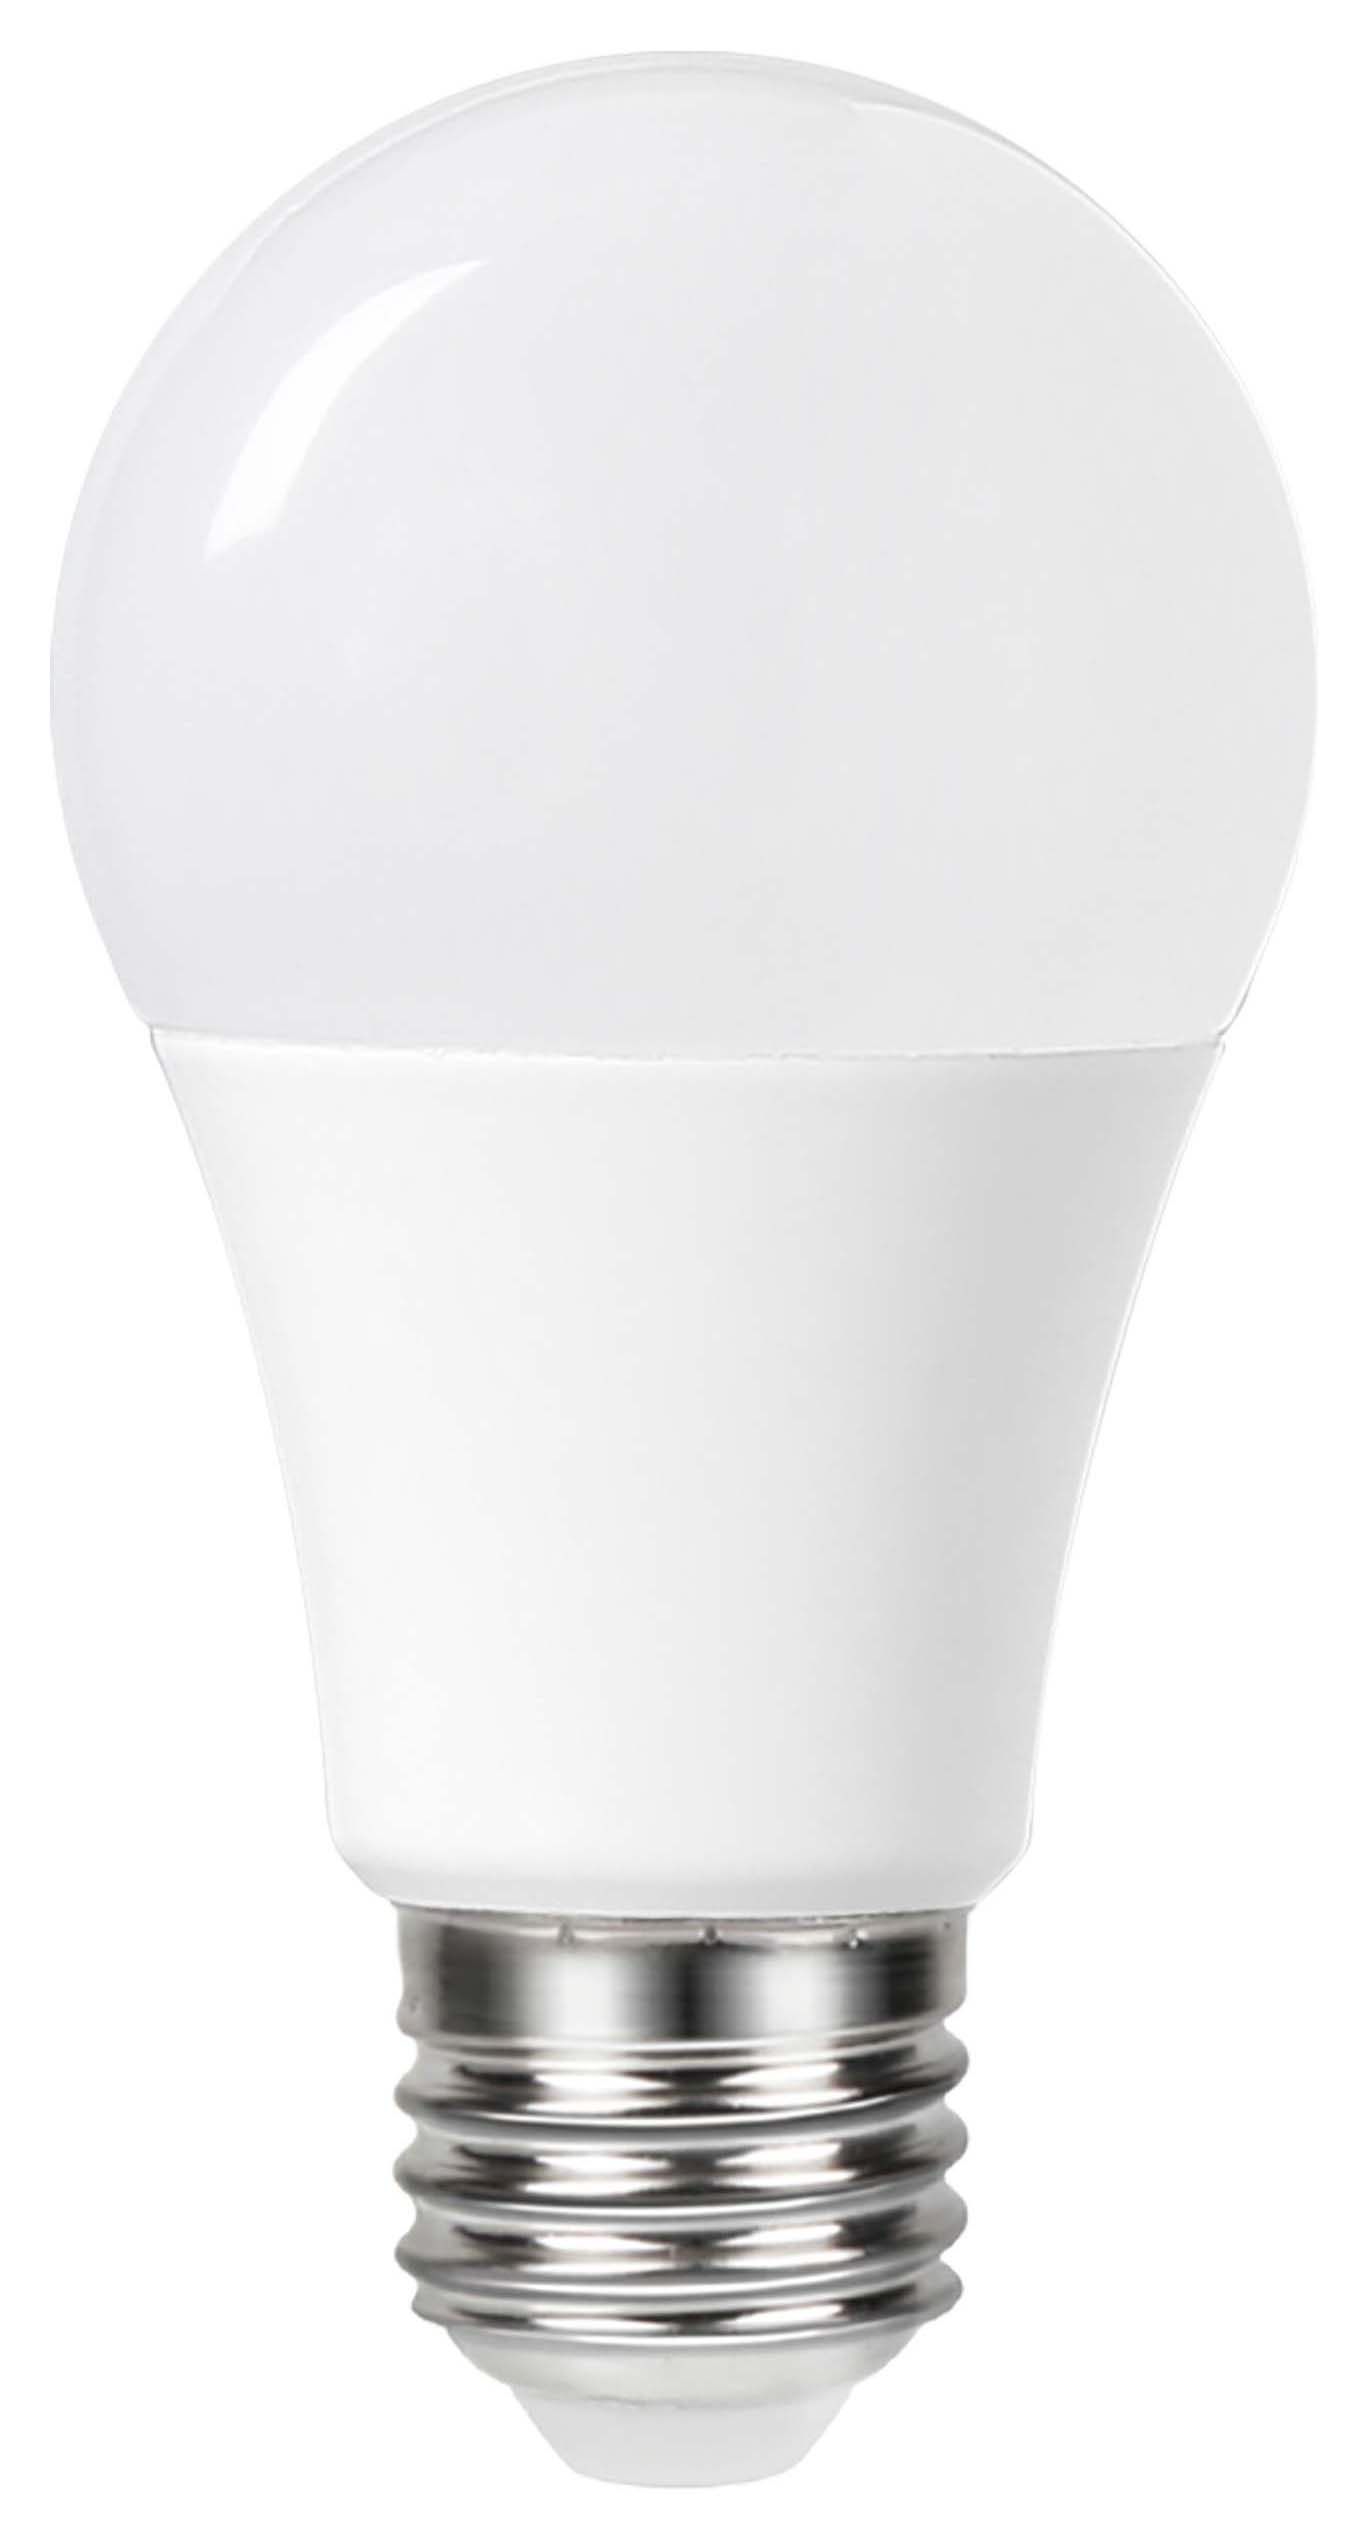 Image of Wickes Dimmable GLS LED E27 14W Warm White Light Bulb